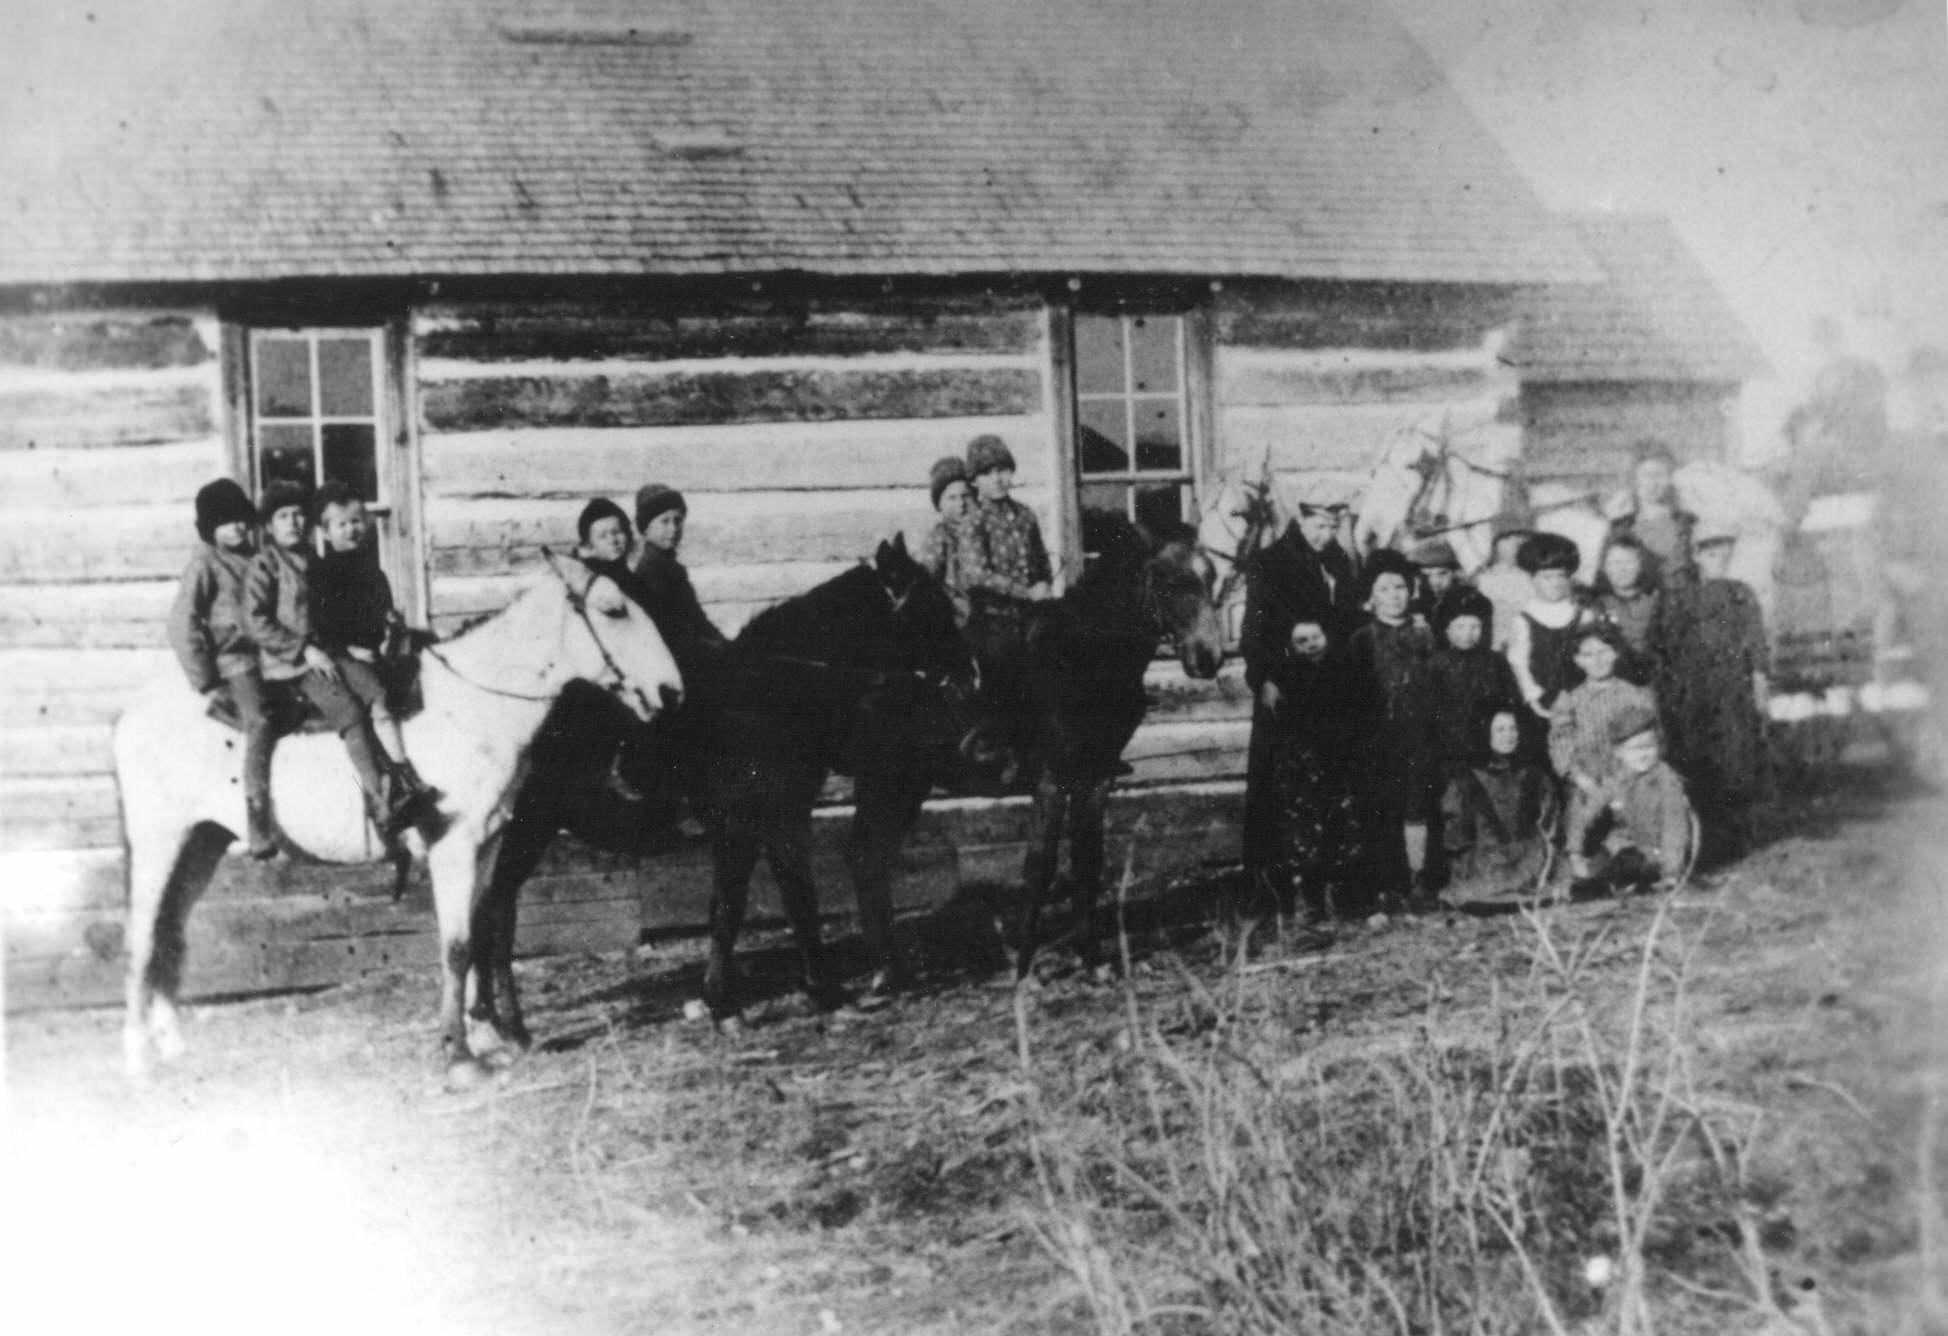 EARLY EDUCATION- Red Deer's first schoolhouse. Isaac Gaetz helped build this schoolhouse. After it was completed